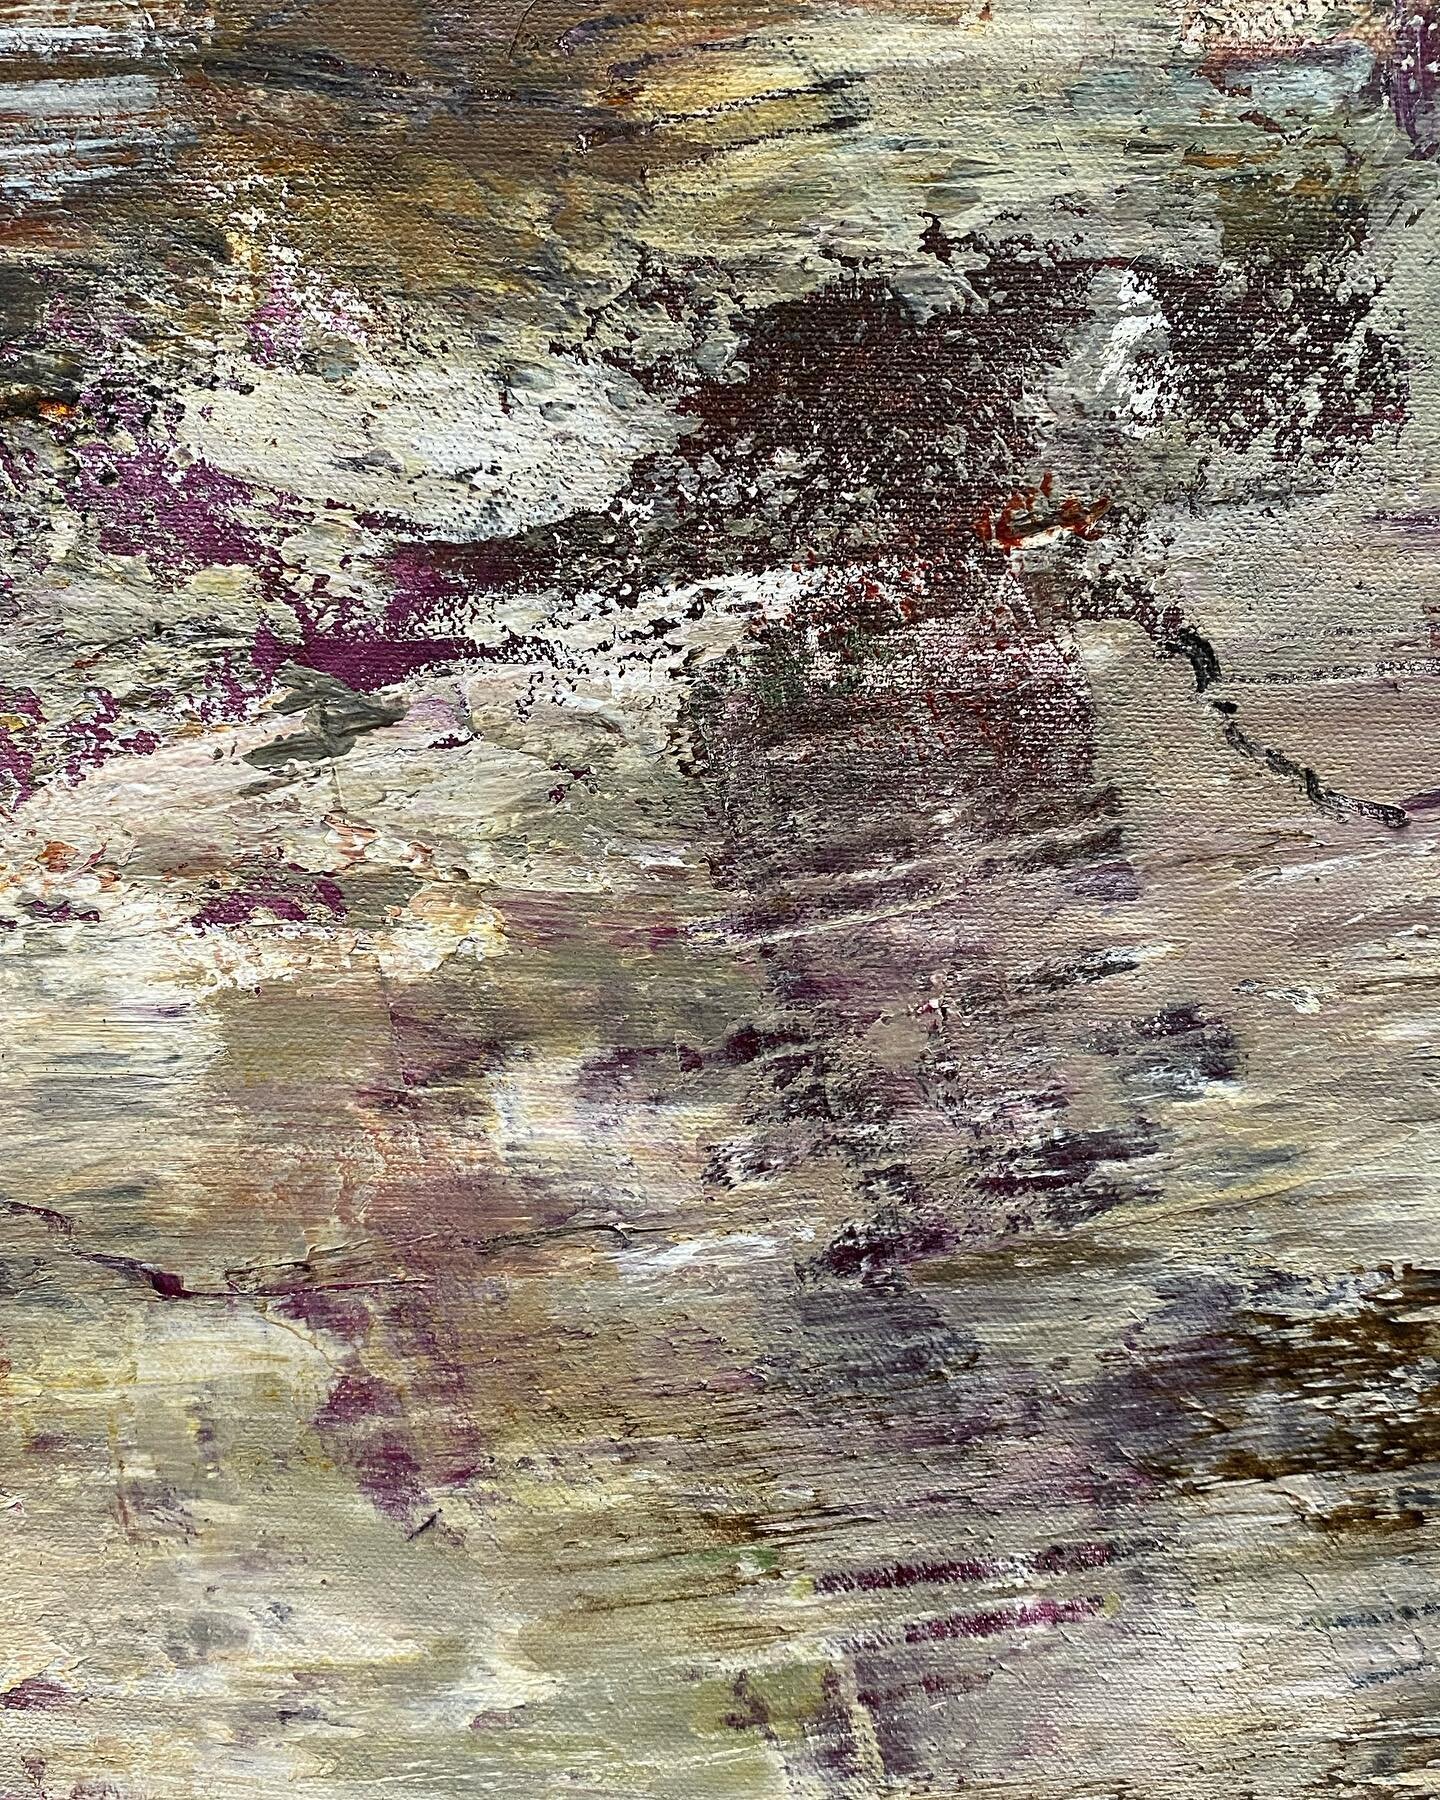 In the painting zone #inthemoment #studiotime #paintings #artwork #abstractprocess #markmaking #processpainting #abstractscapes #mixedmediapainting #twentytwentysixgallery #sydneyartists